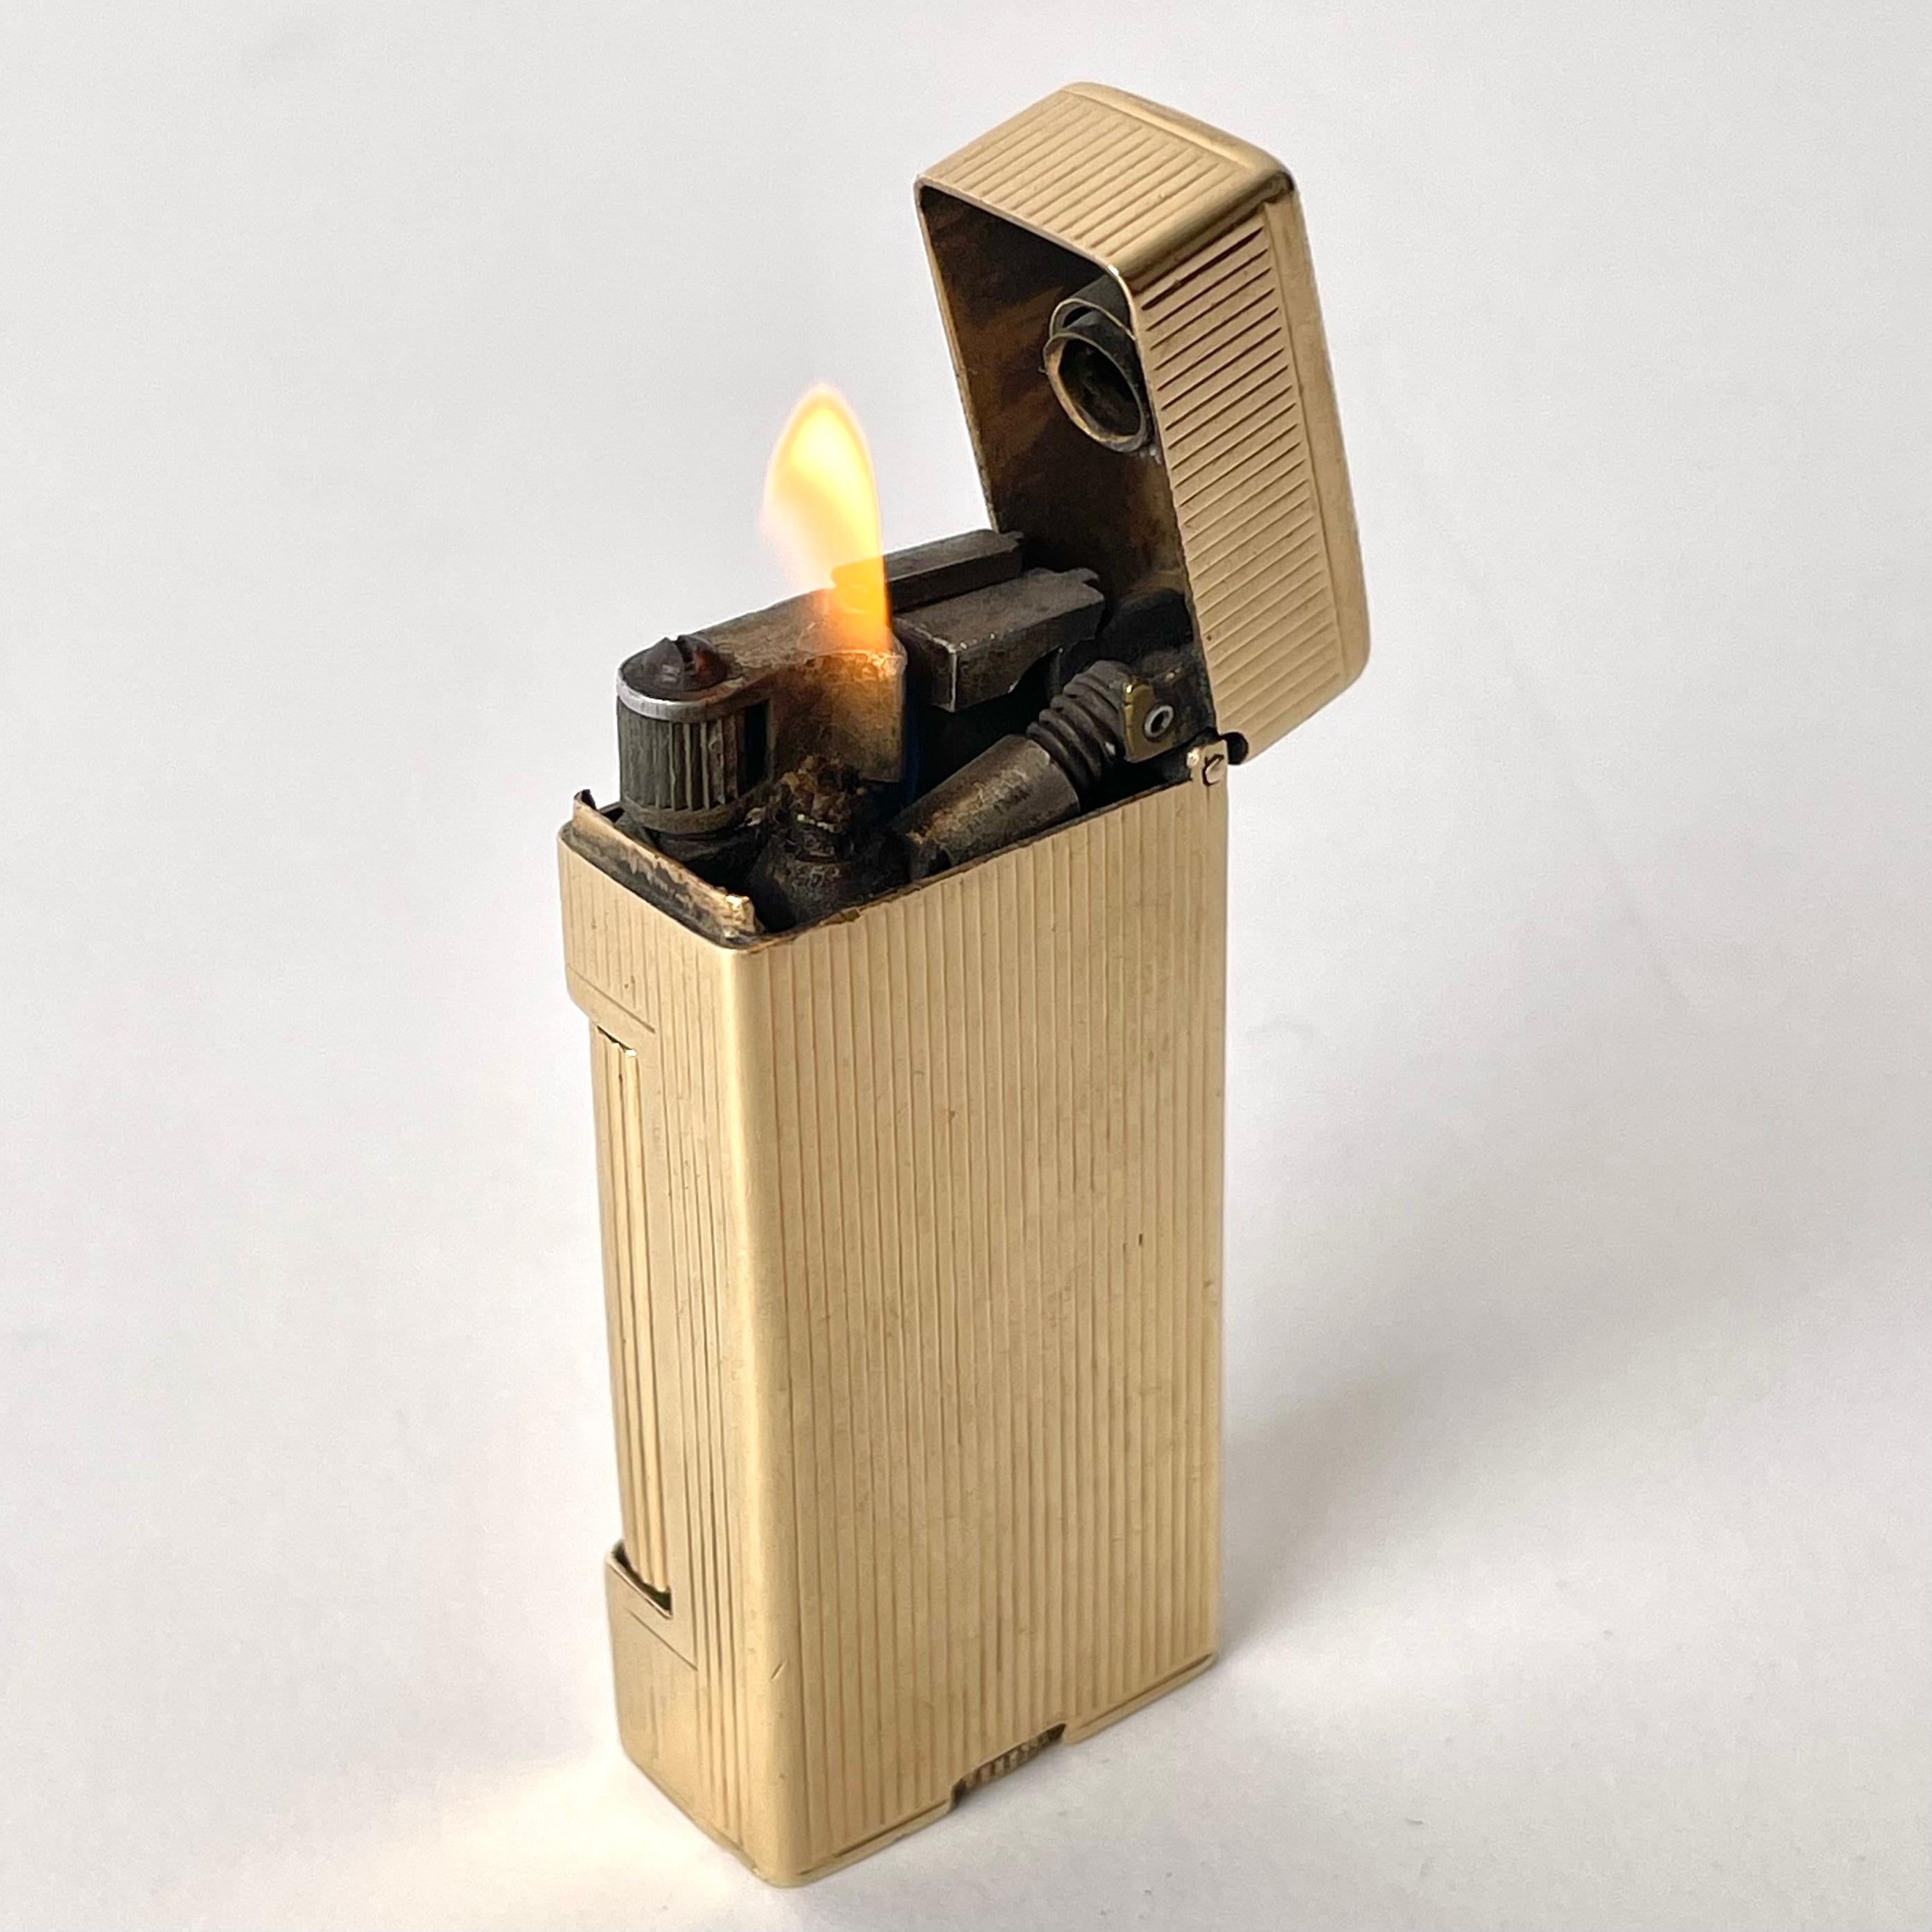 An Elegant 14 Carat Gold Cigarette Lighter, Gasoline Petrol, Albert Dunhill,  probably made during the 1940s or 1950s

The perfect accessory for any gentleman or lady looking to make their smoking habit even more glamorous by adding a luxury 14